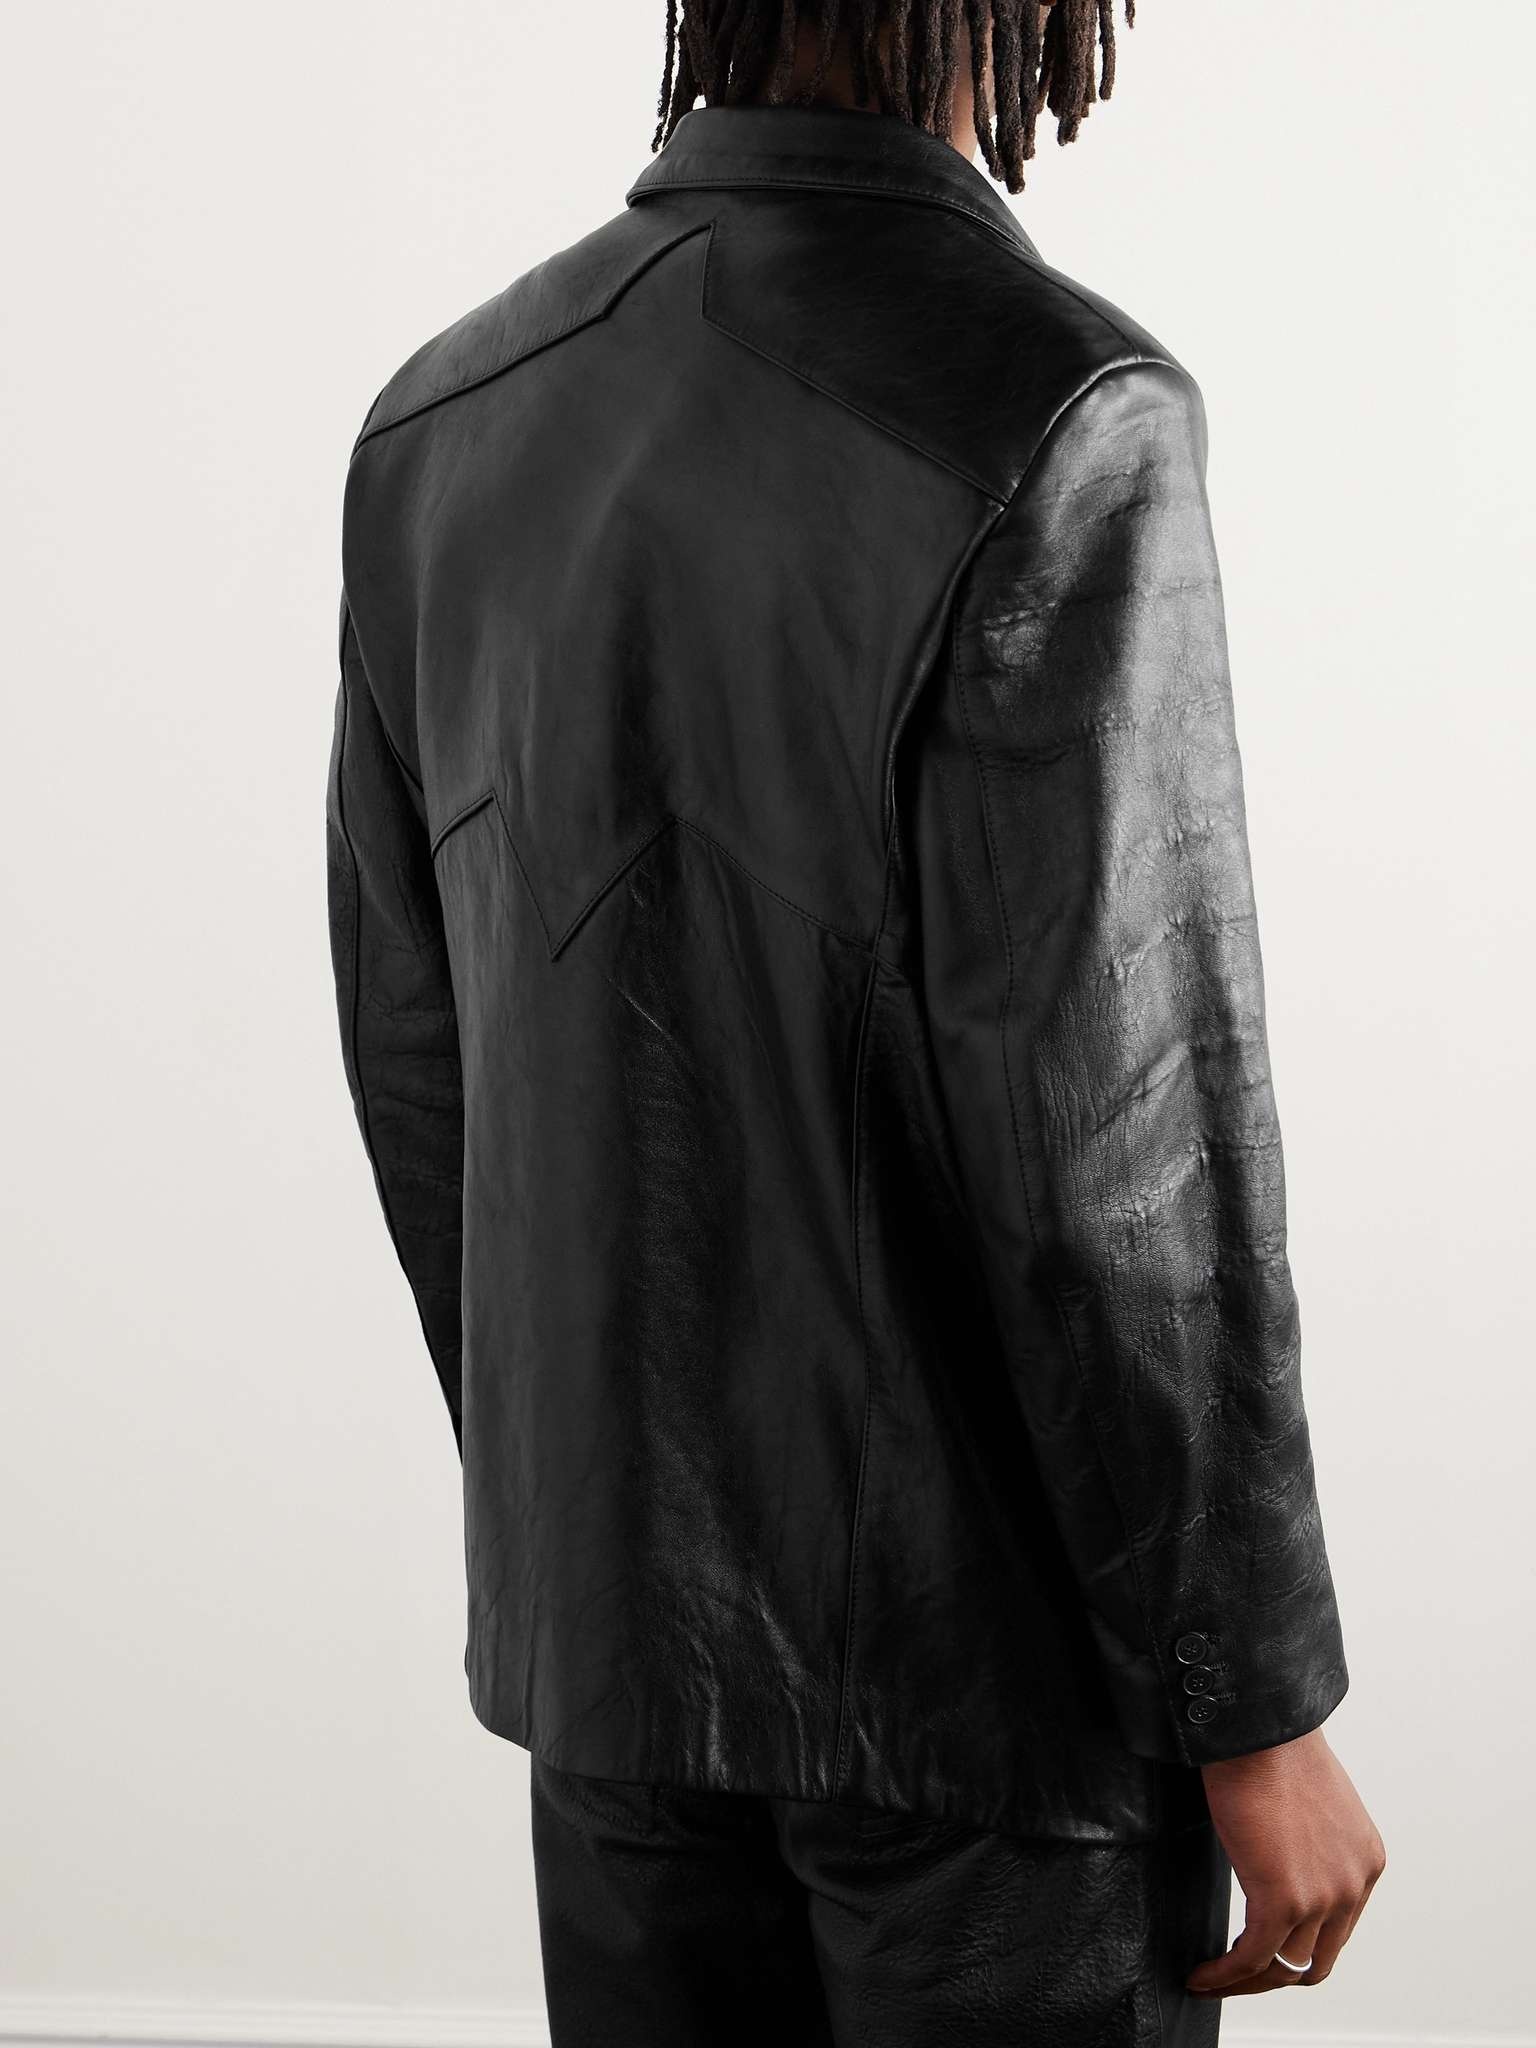 Go To Dallas and Take a Left Distressed Paneled Leather Jacket - 4